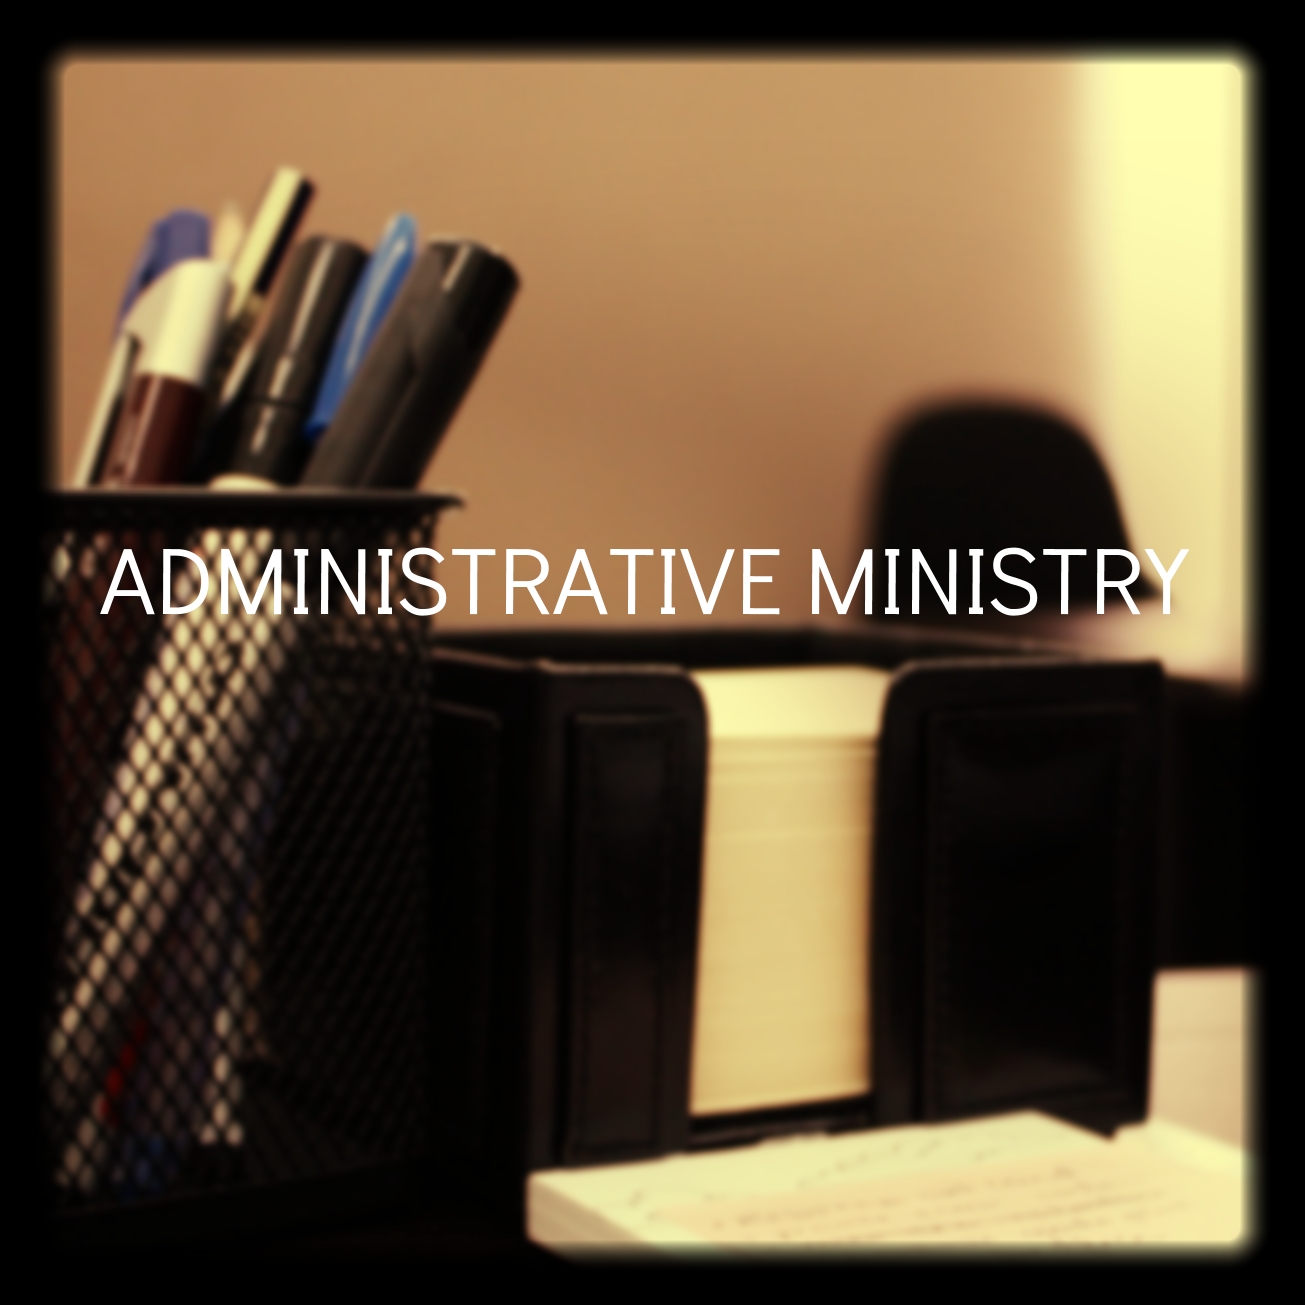 ADMINISTRATIVE MINISTRY